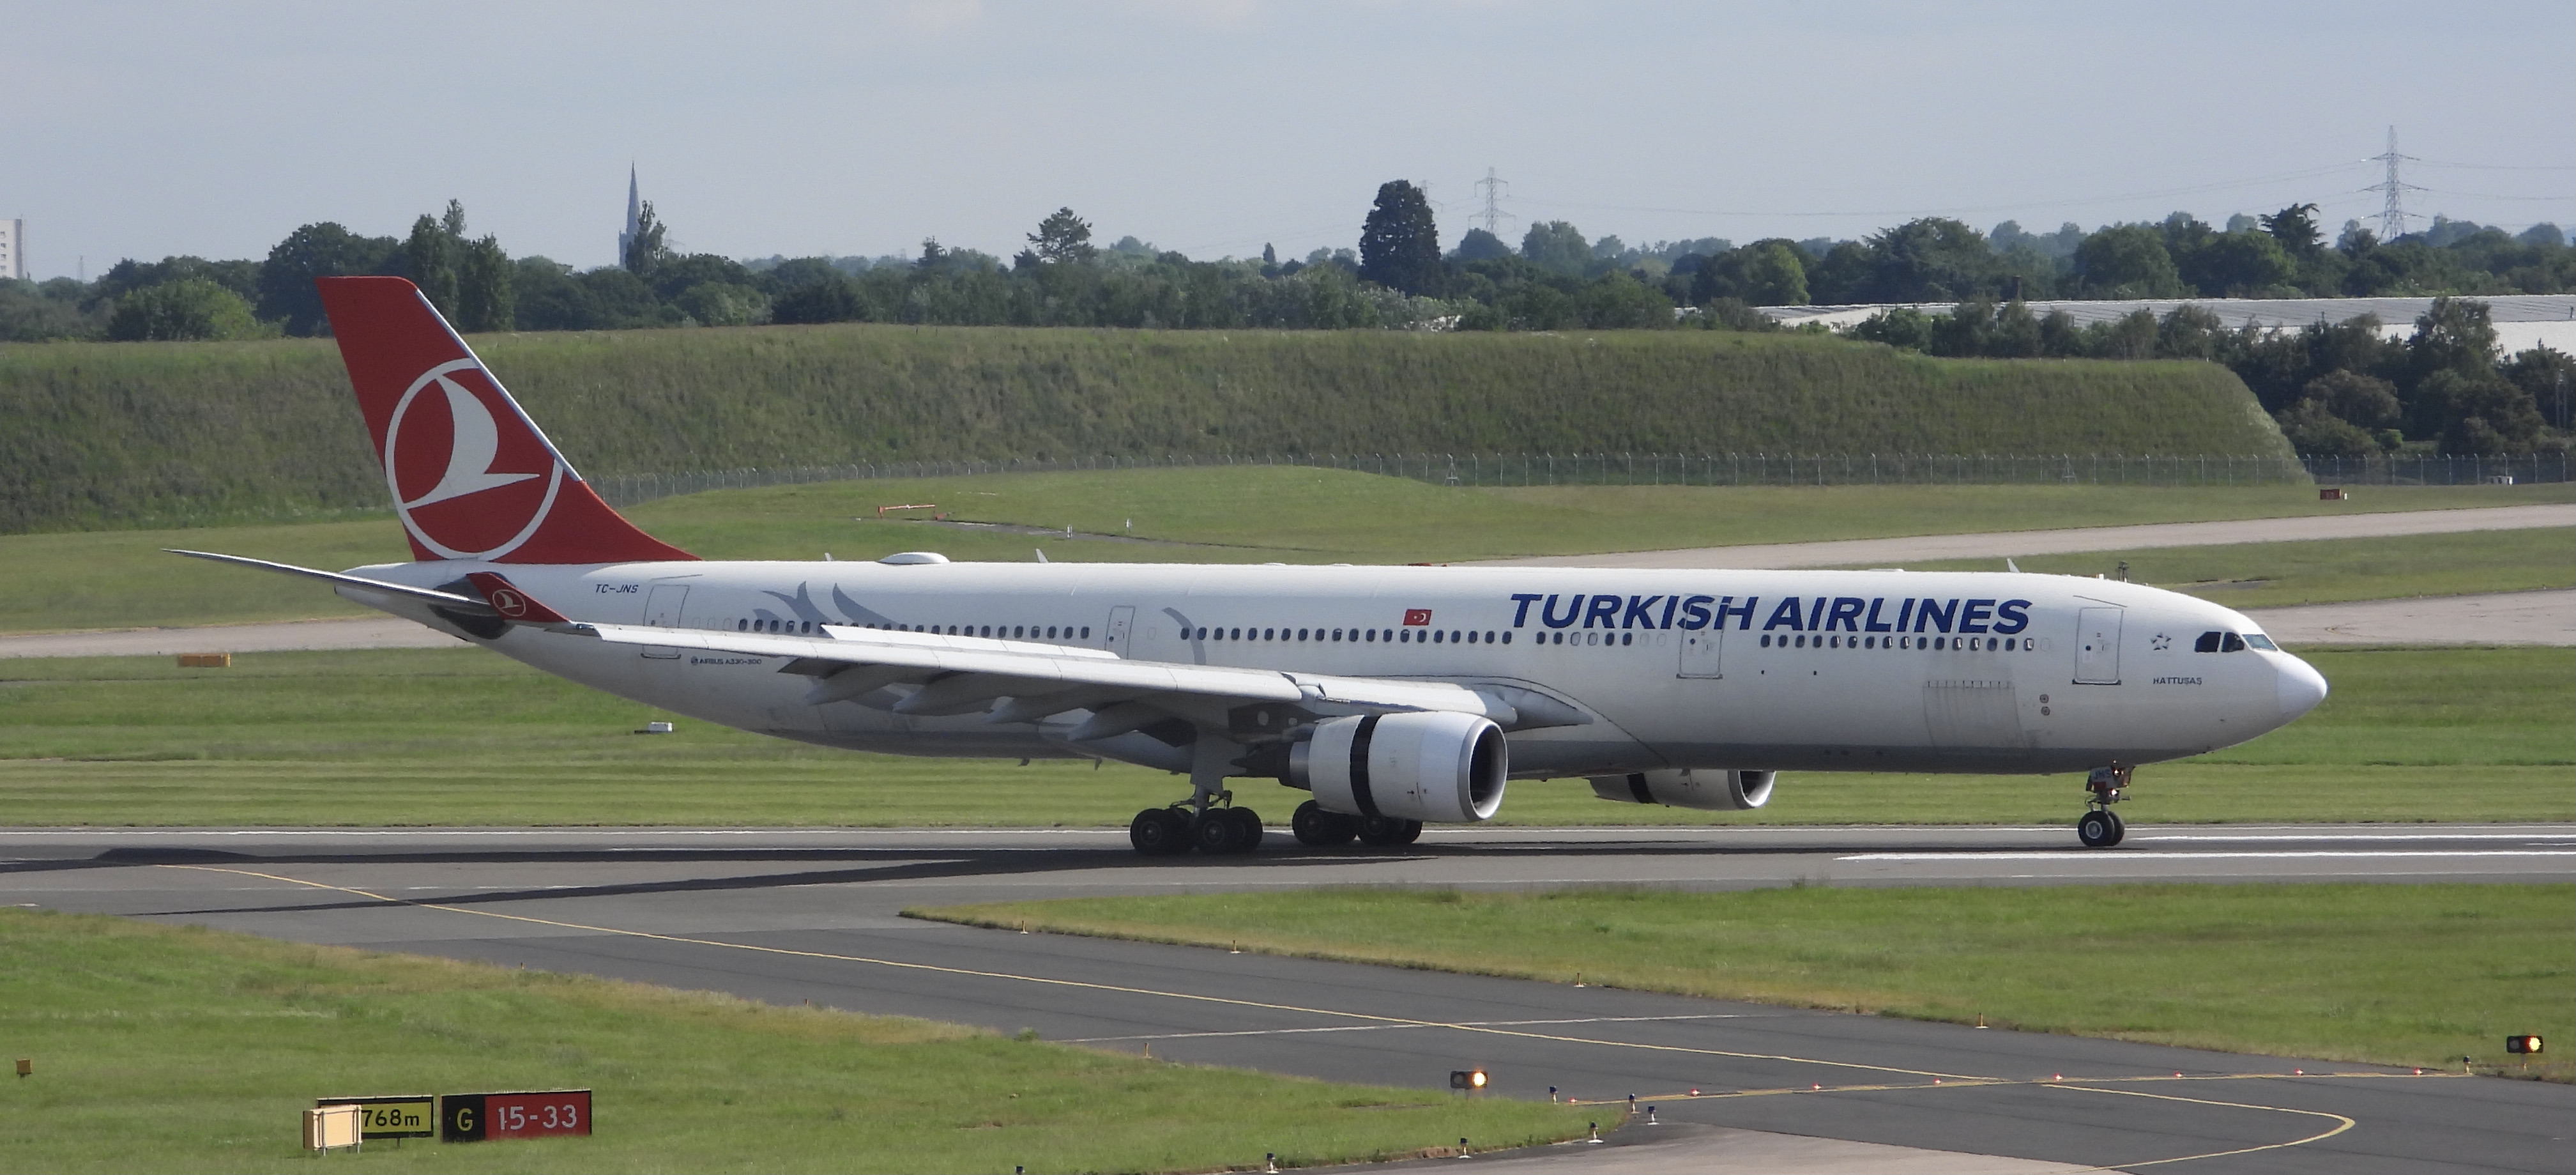 TC-JNS/TCJNS THY Turkish Airlines Airbus A330-303 Photo by Emirates101 - AVSpotters.com